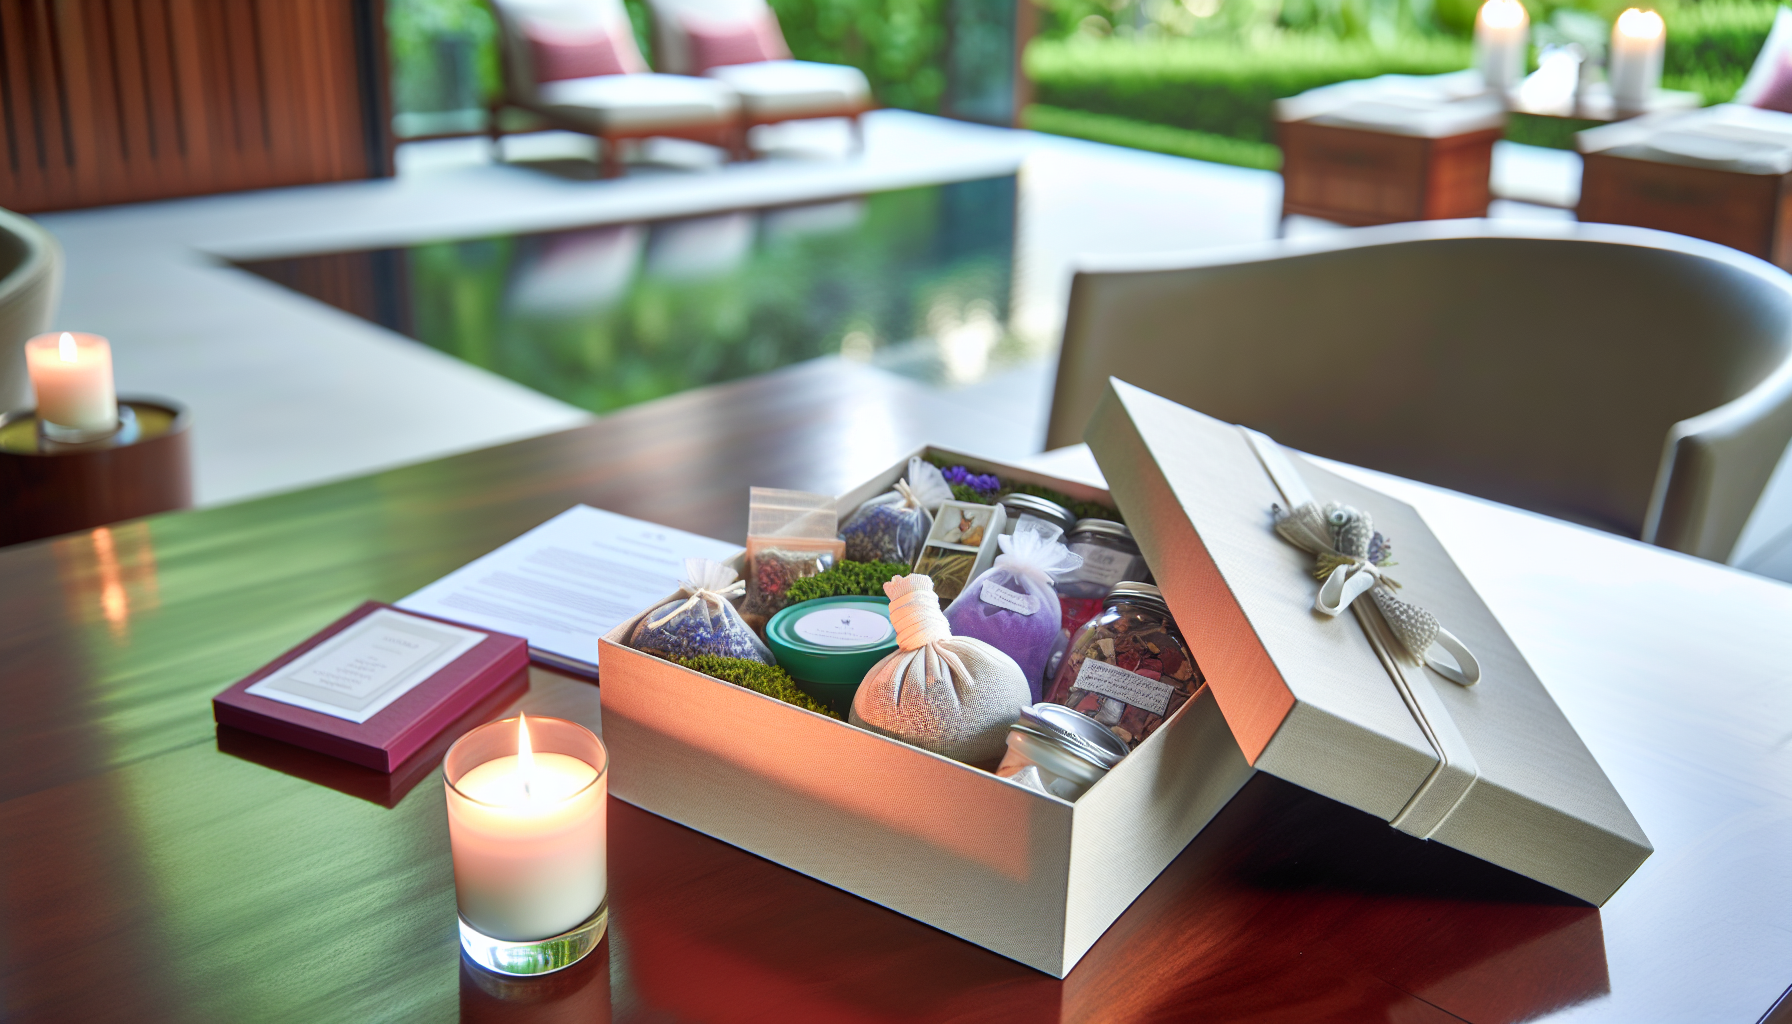 A wellness box with aromatic candles, herbal tea, and relaxation items